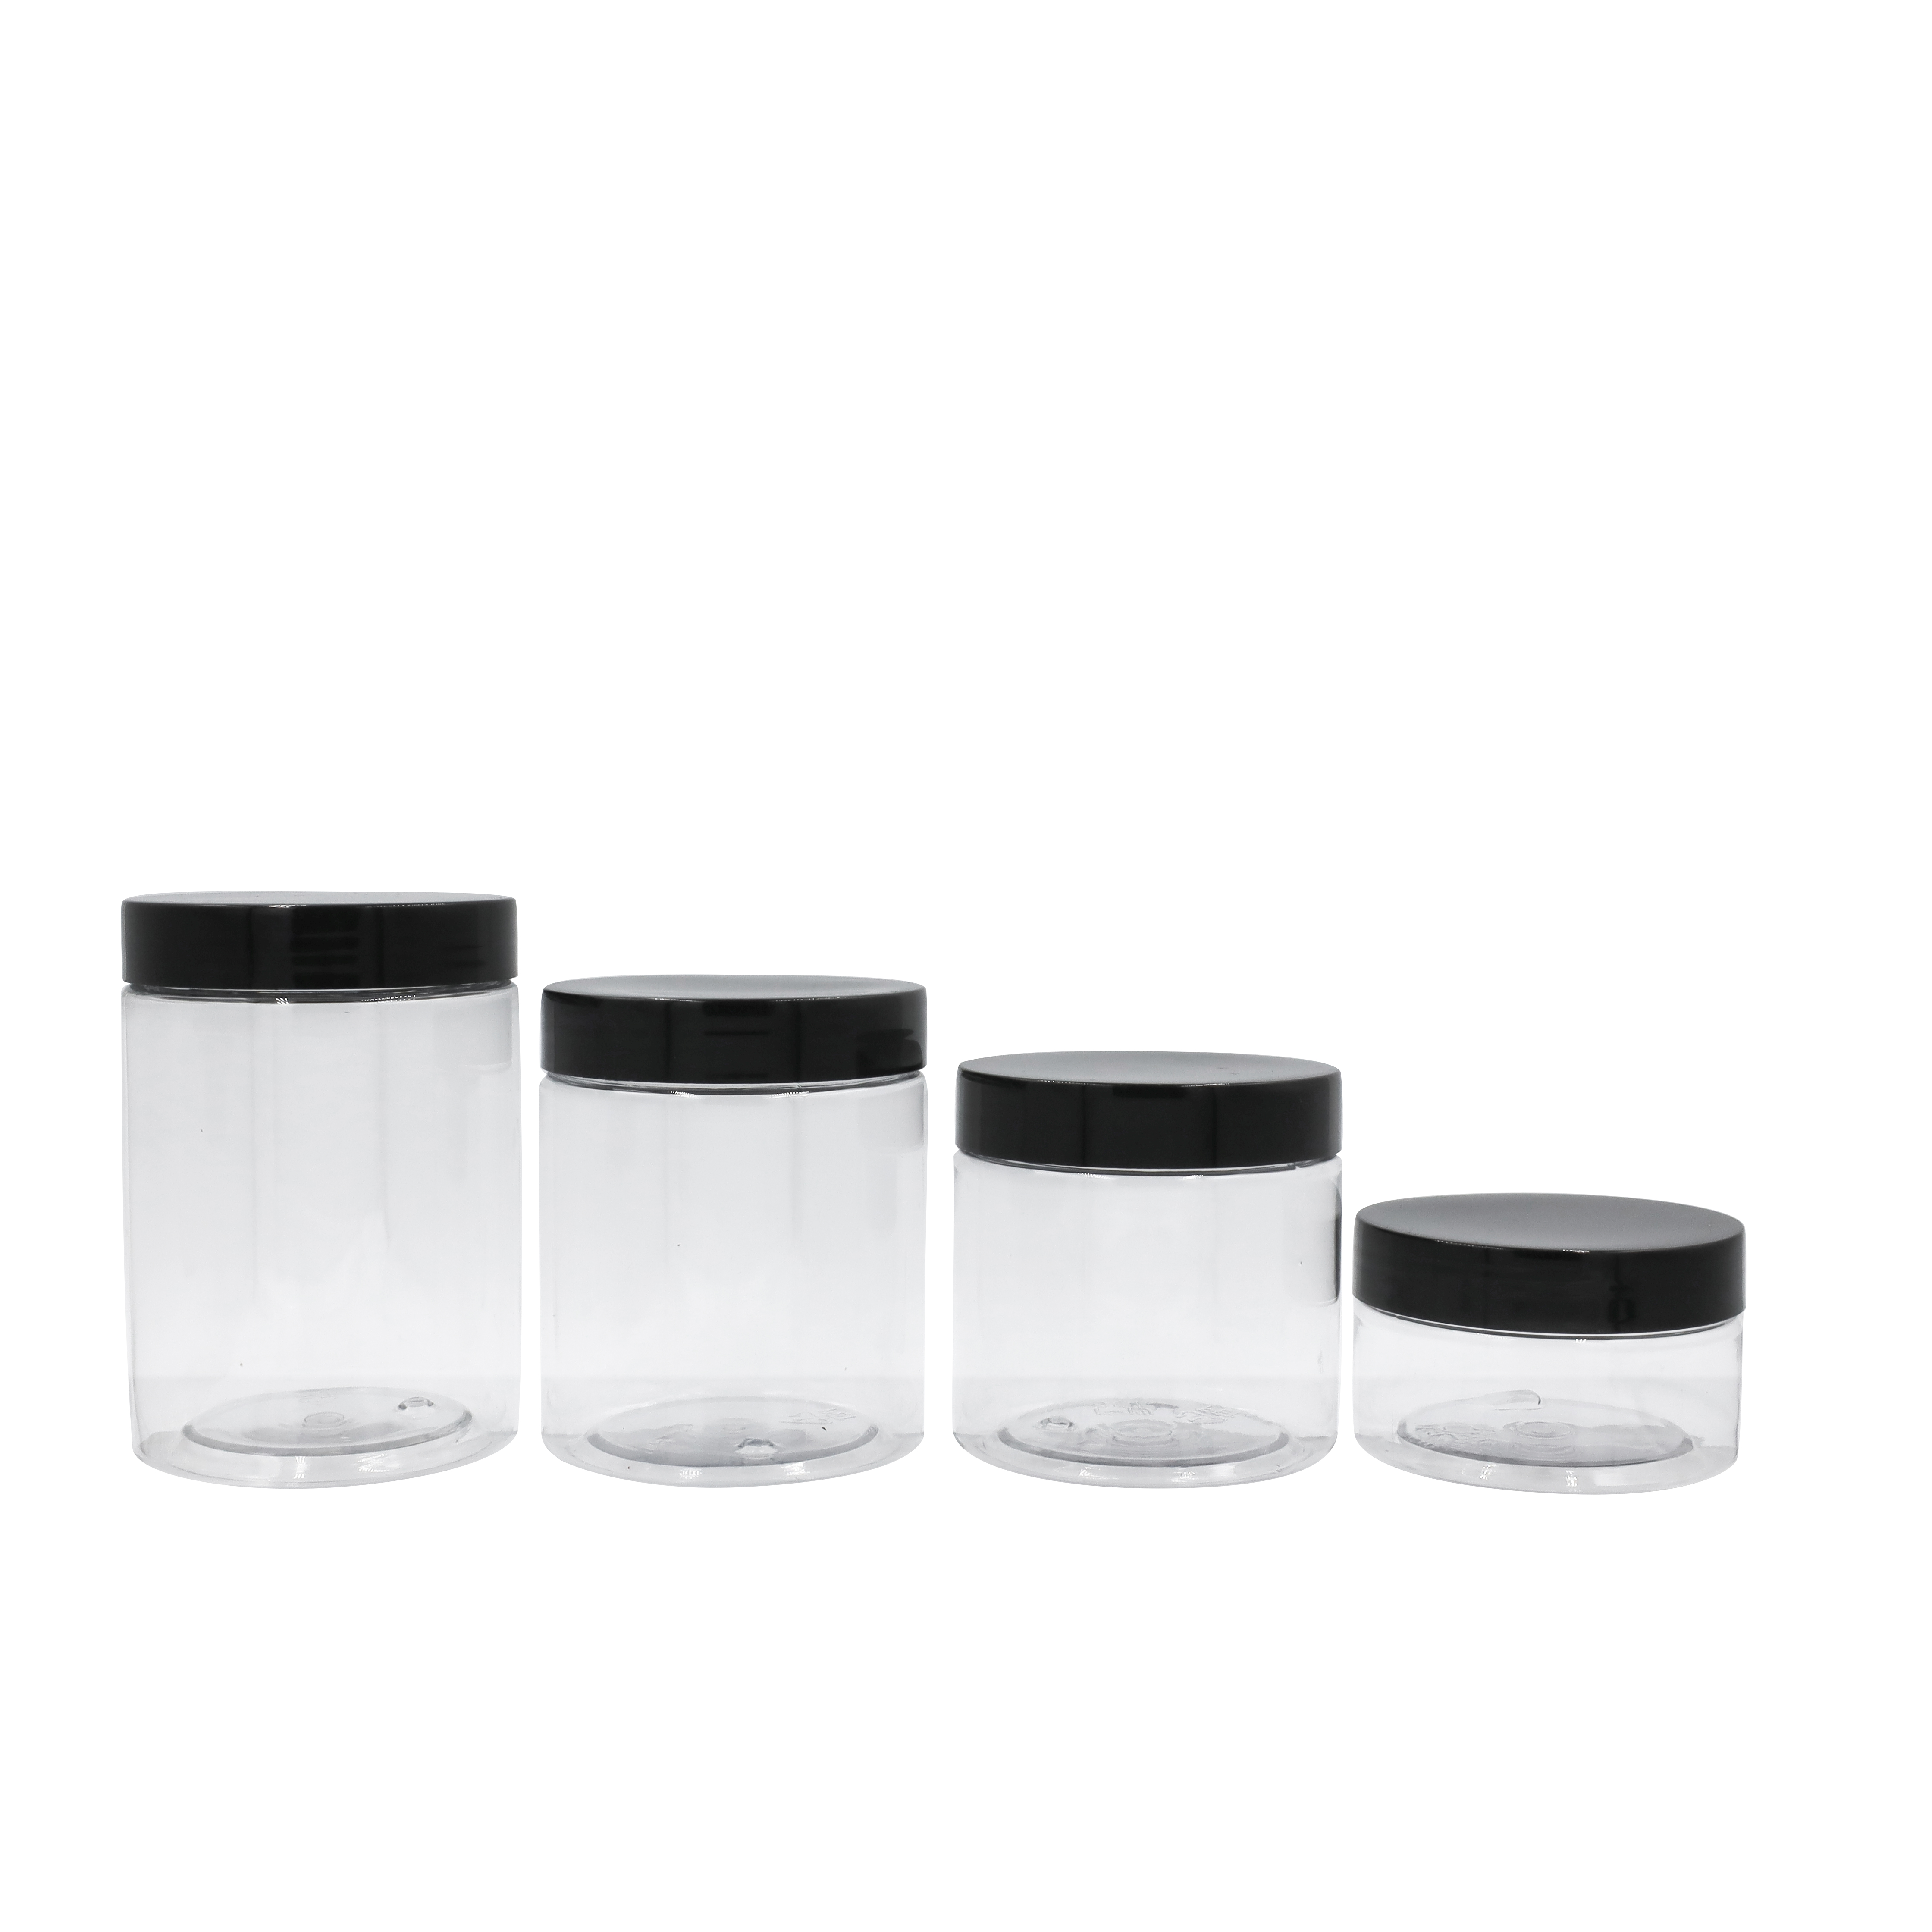 50ml 80ml 100ml 120ml 150ml 200ml 250ml Skin Care Cosmetic Containers Round PET Plastic Jars Containers